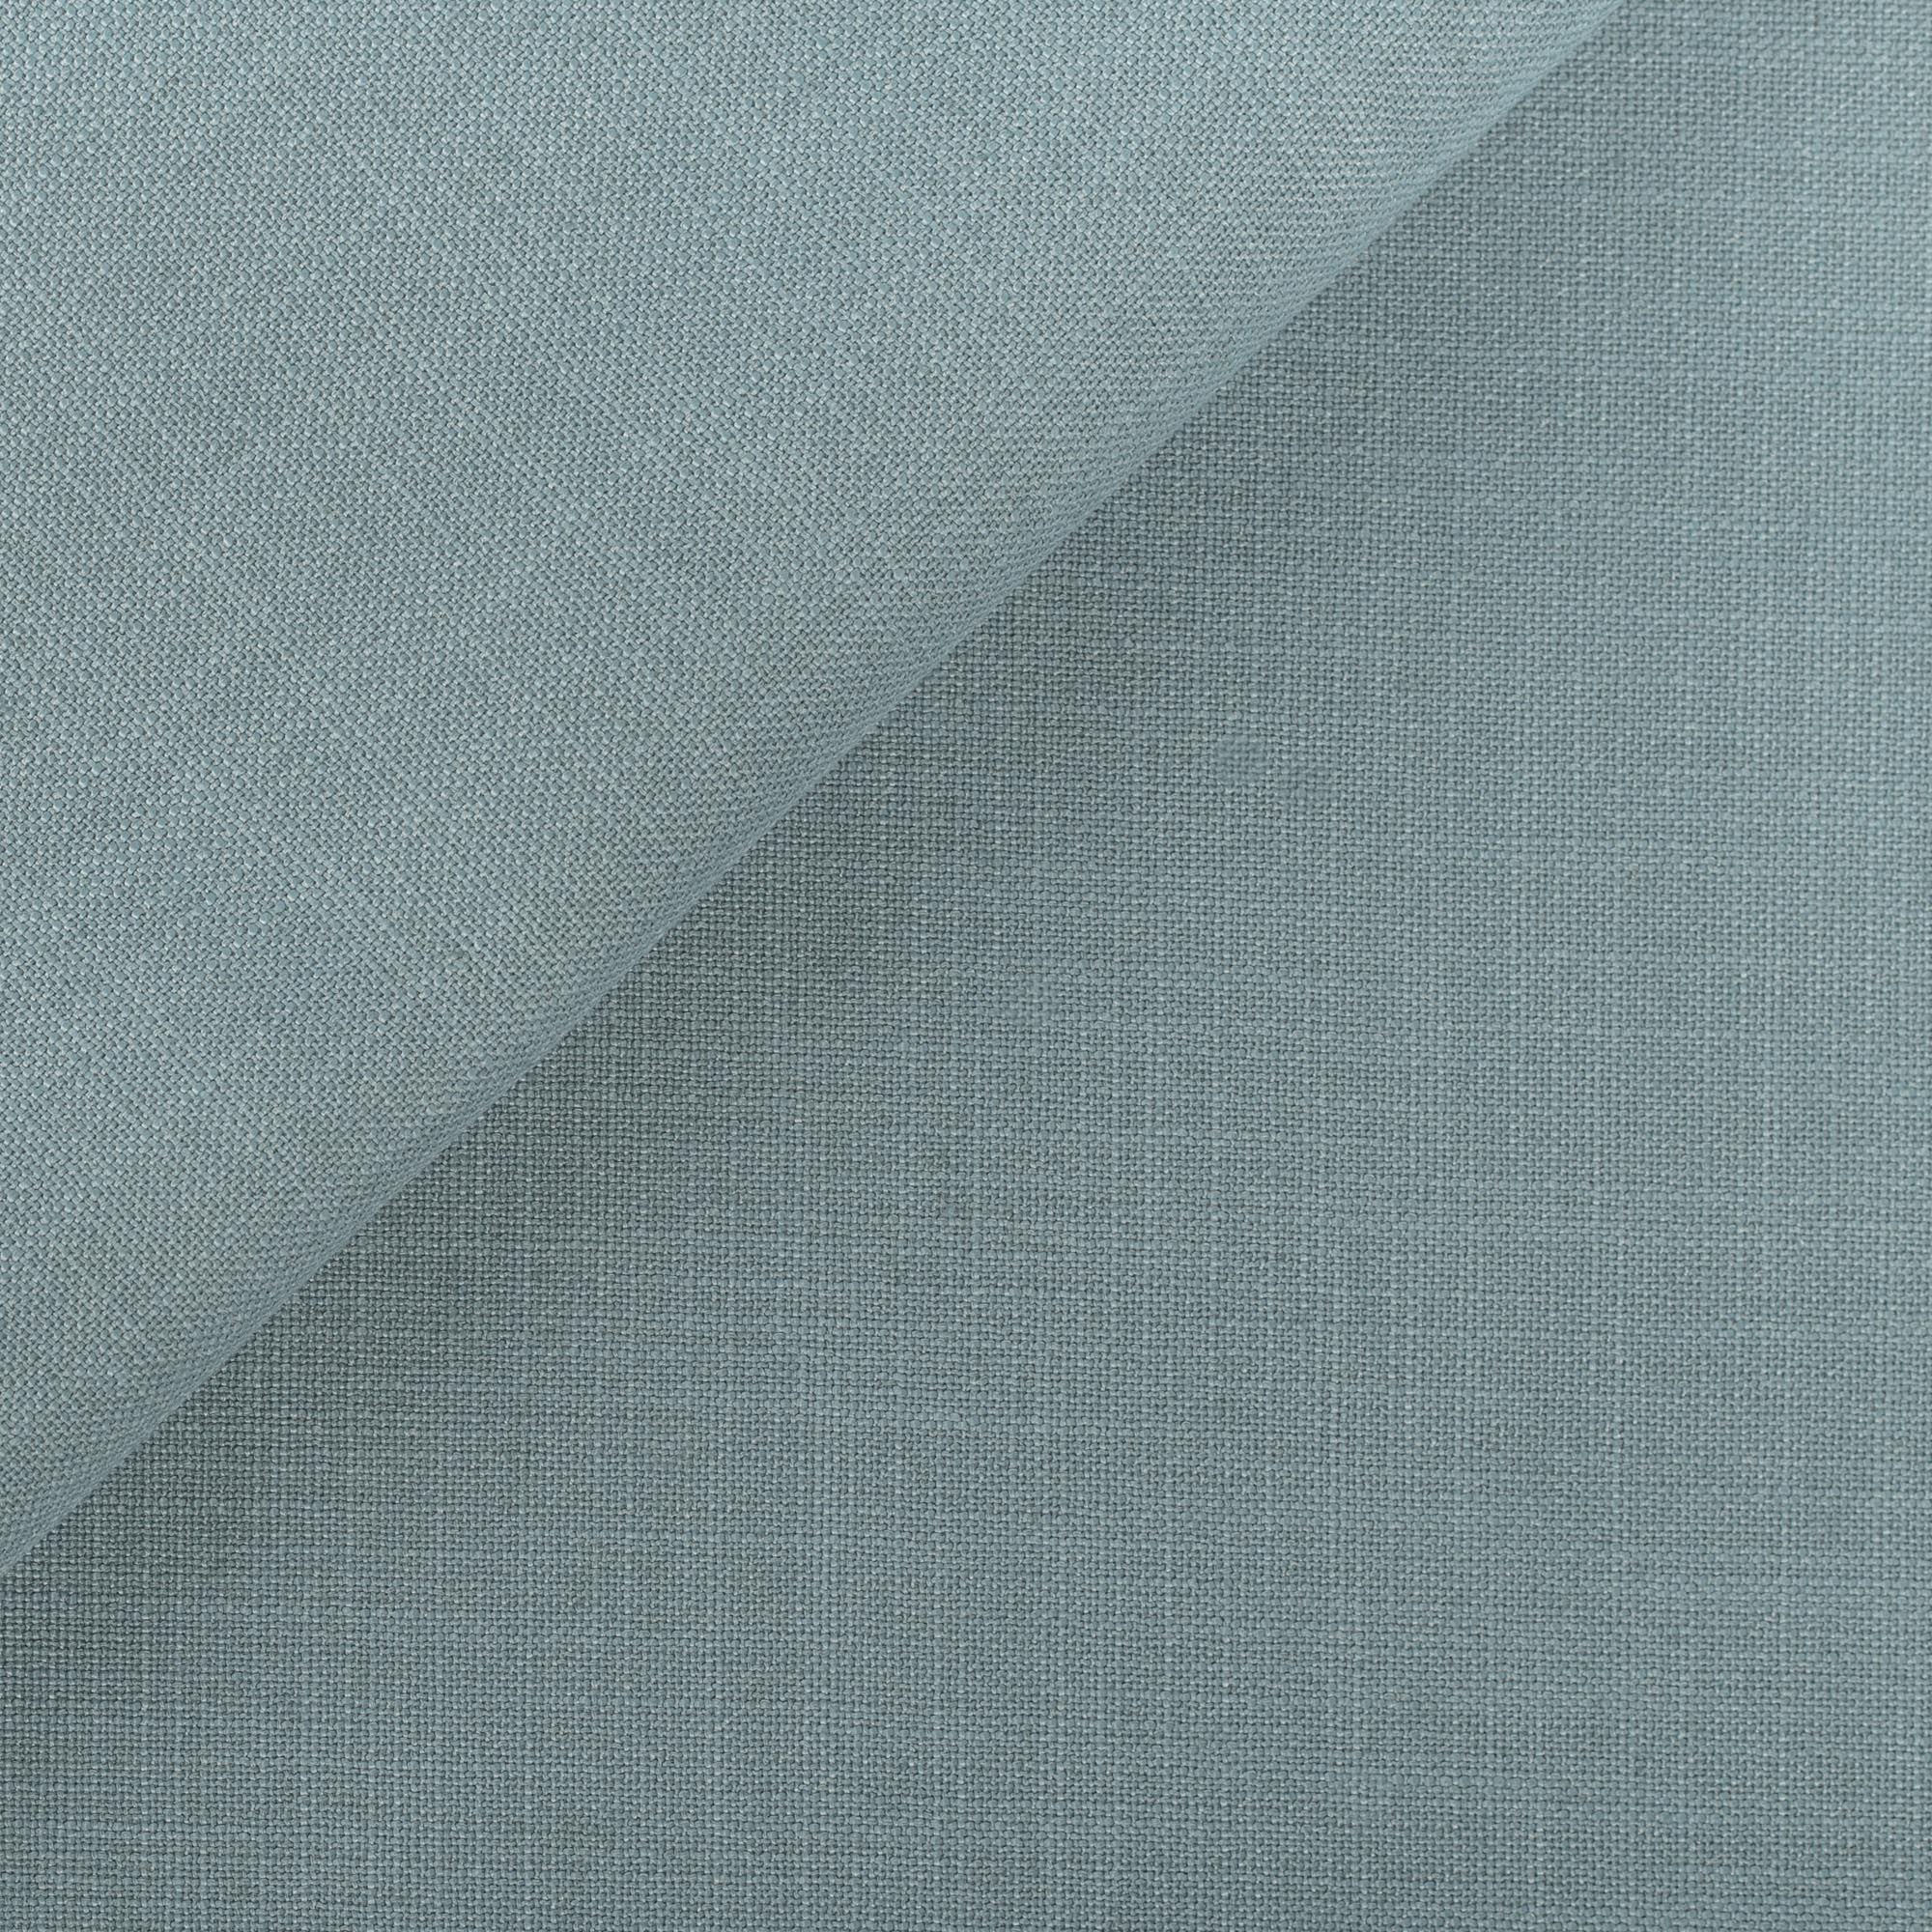 Grange Fabric Seaspray, a watery blue high performance upholstery fabric : close up view